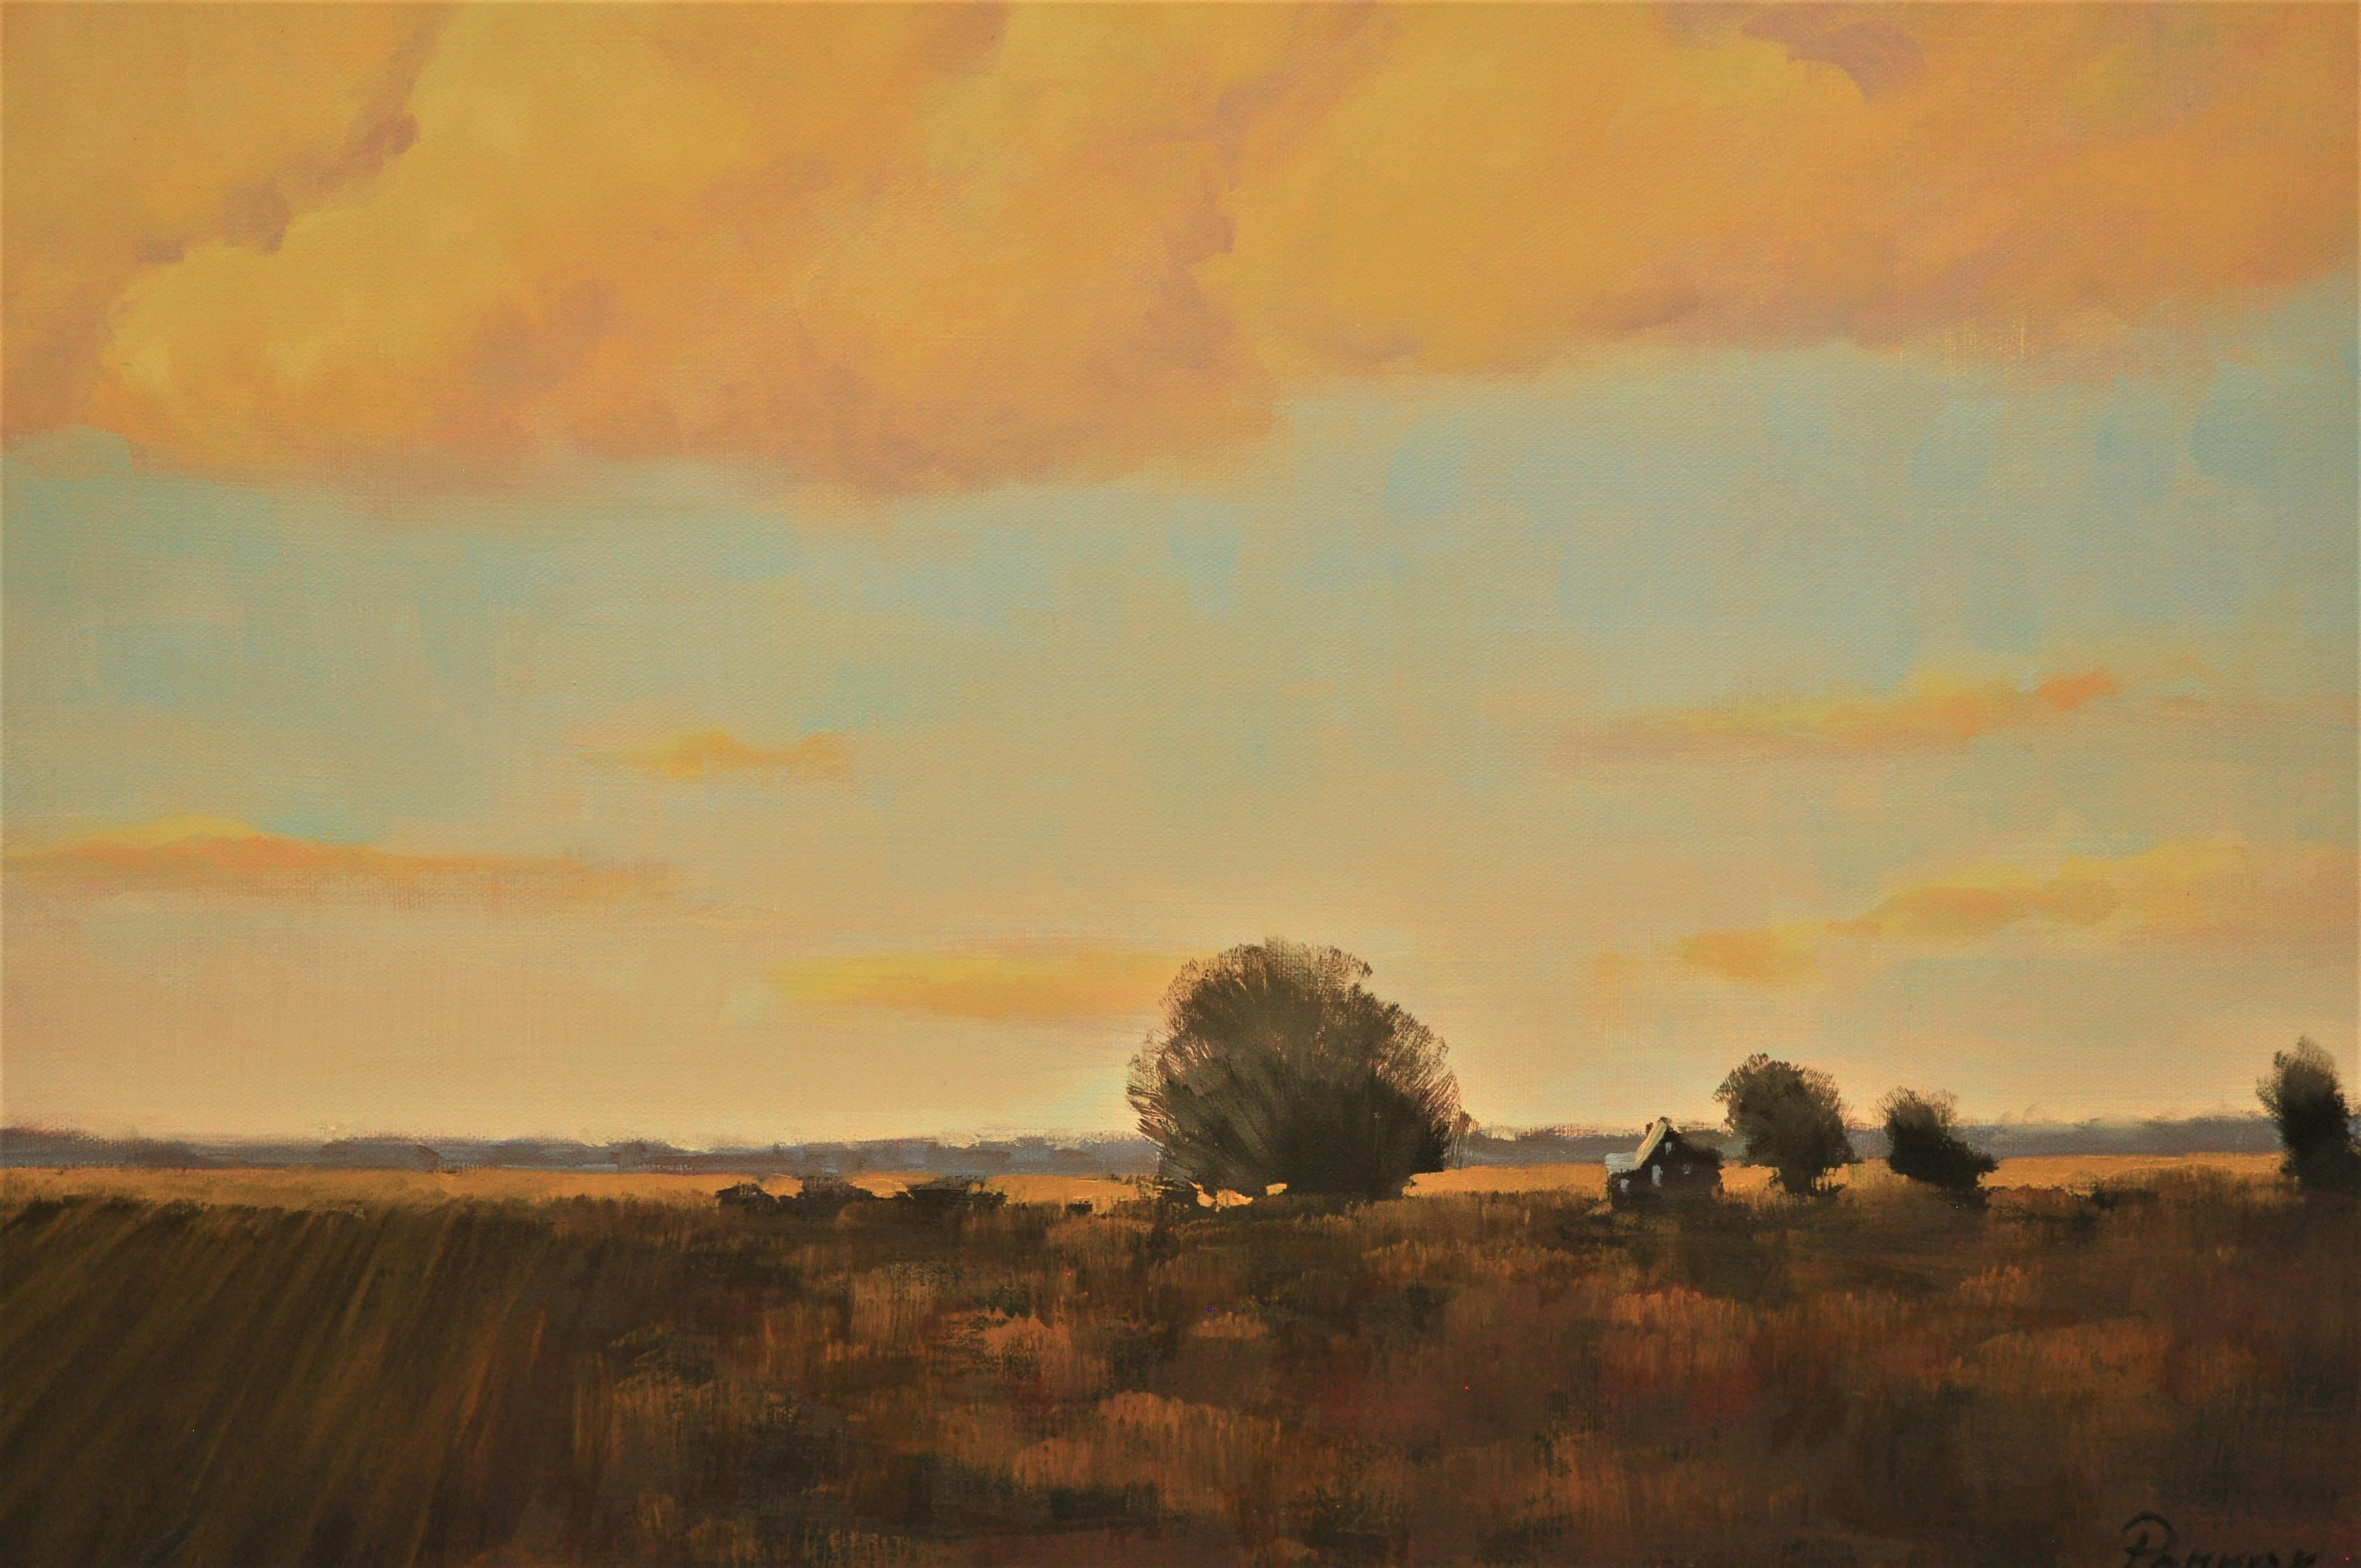 Big Sky - Brown Landscape Painting by Robert Pennor